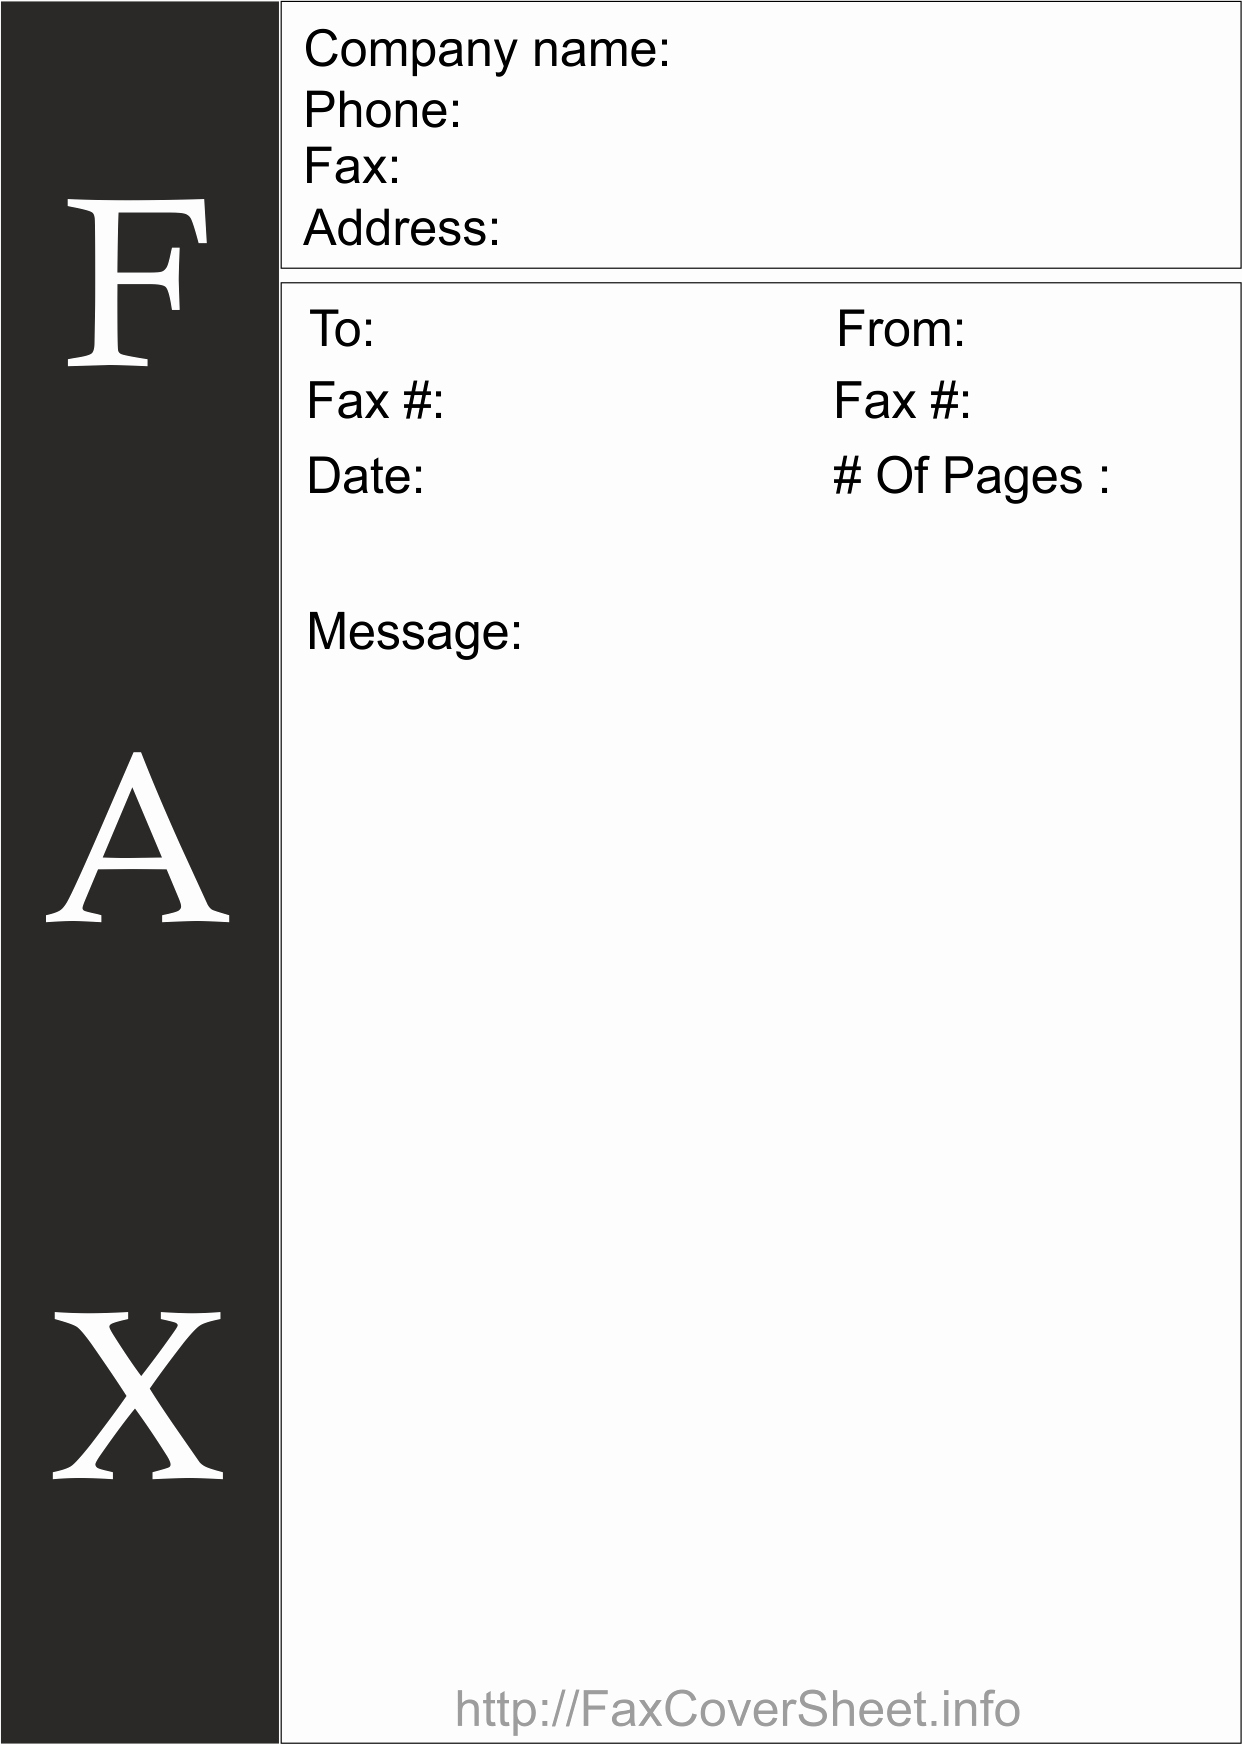 Fax Cover Sheet Microsoft Word New How to Find Blank Fax Cover Sheet within Microsoft Word